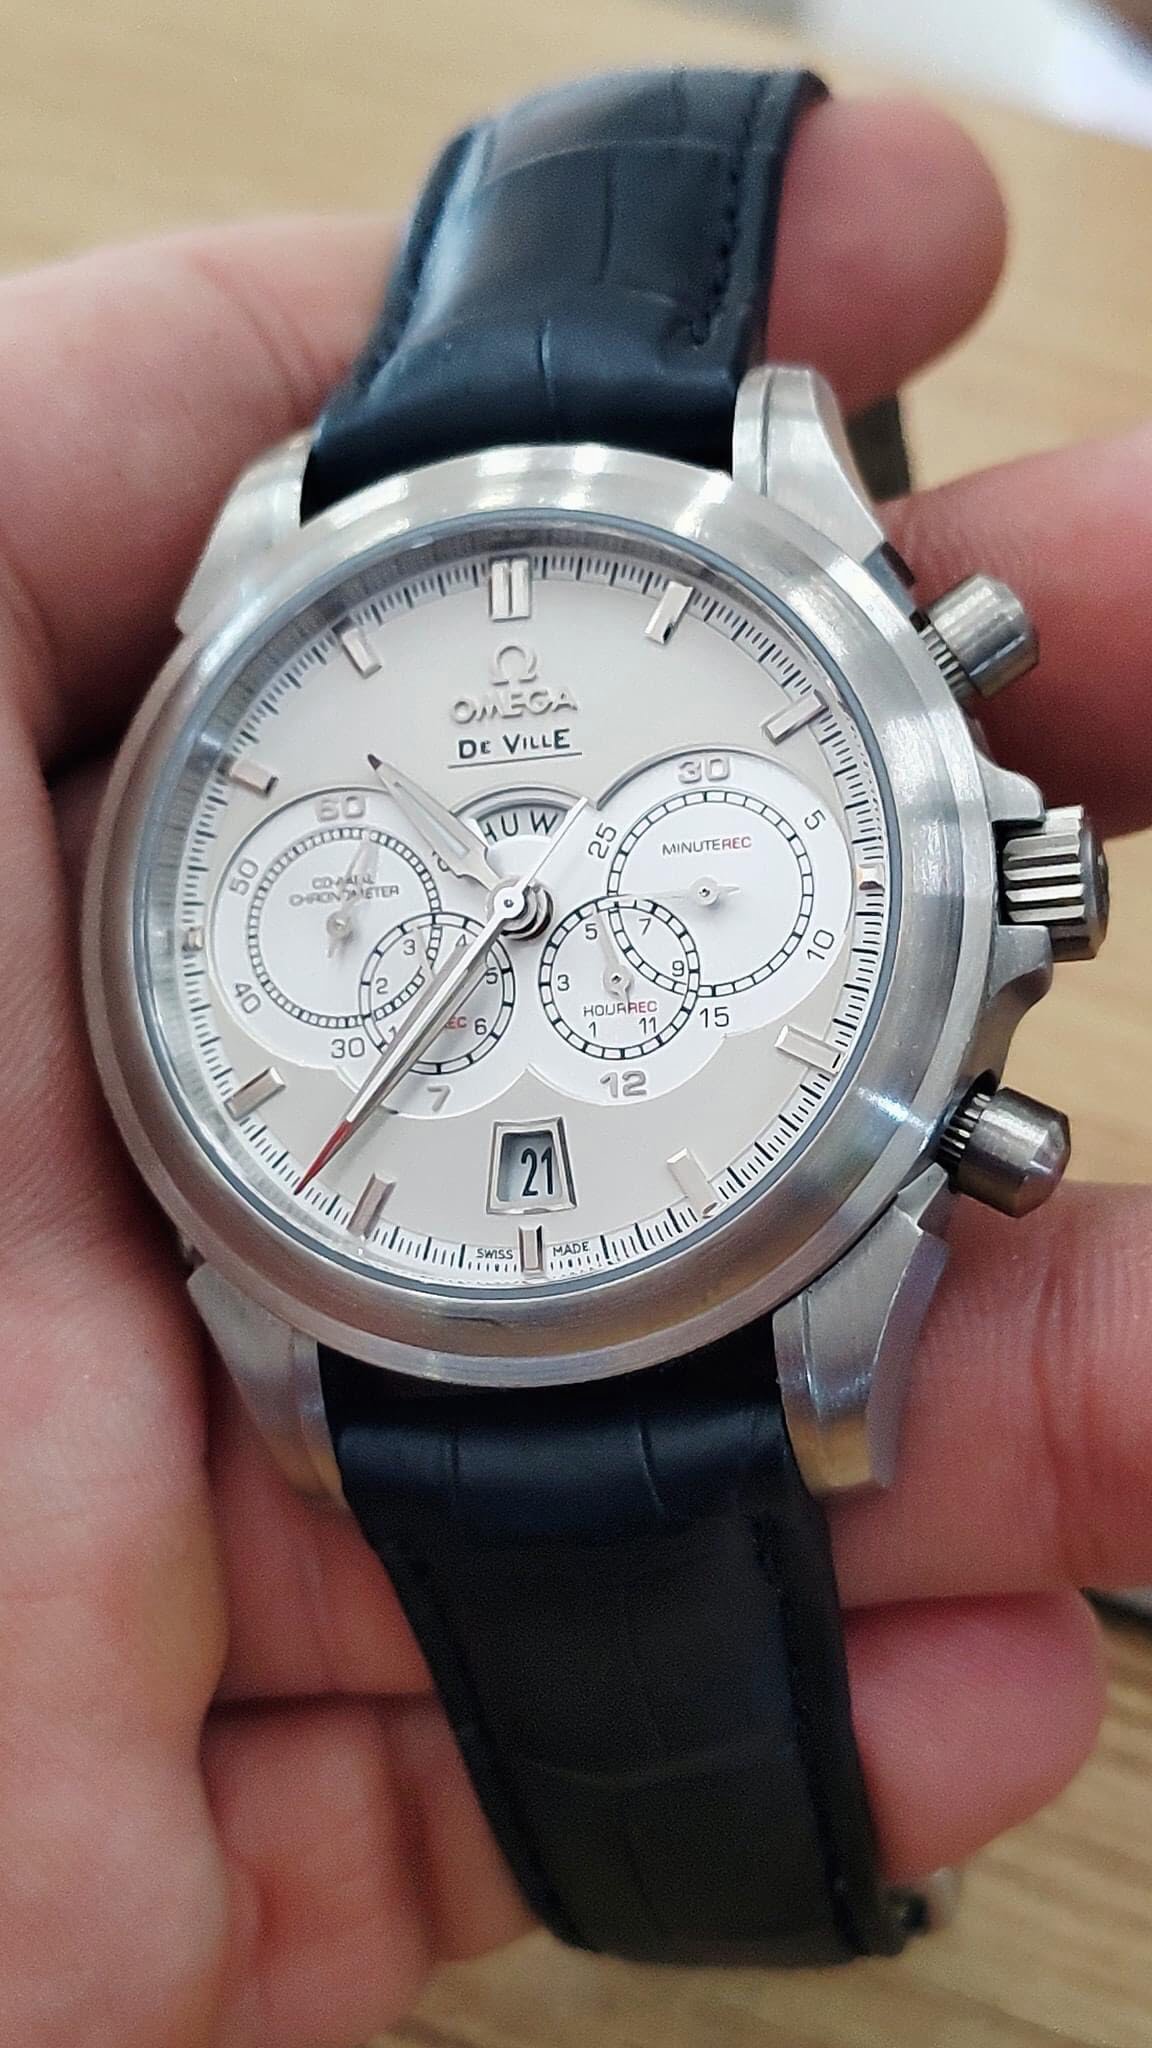 CHRONOSCOPE- CO-AXIAL 4-COUNTERS CHRONOGRAPH 41 MM 422.53.41.52.09.001 42253415209001